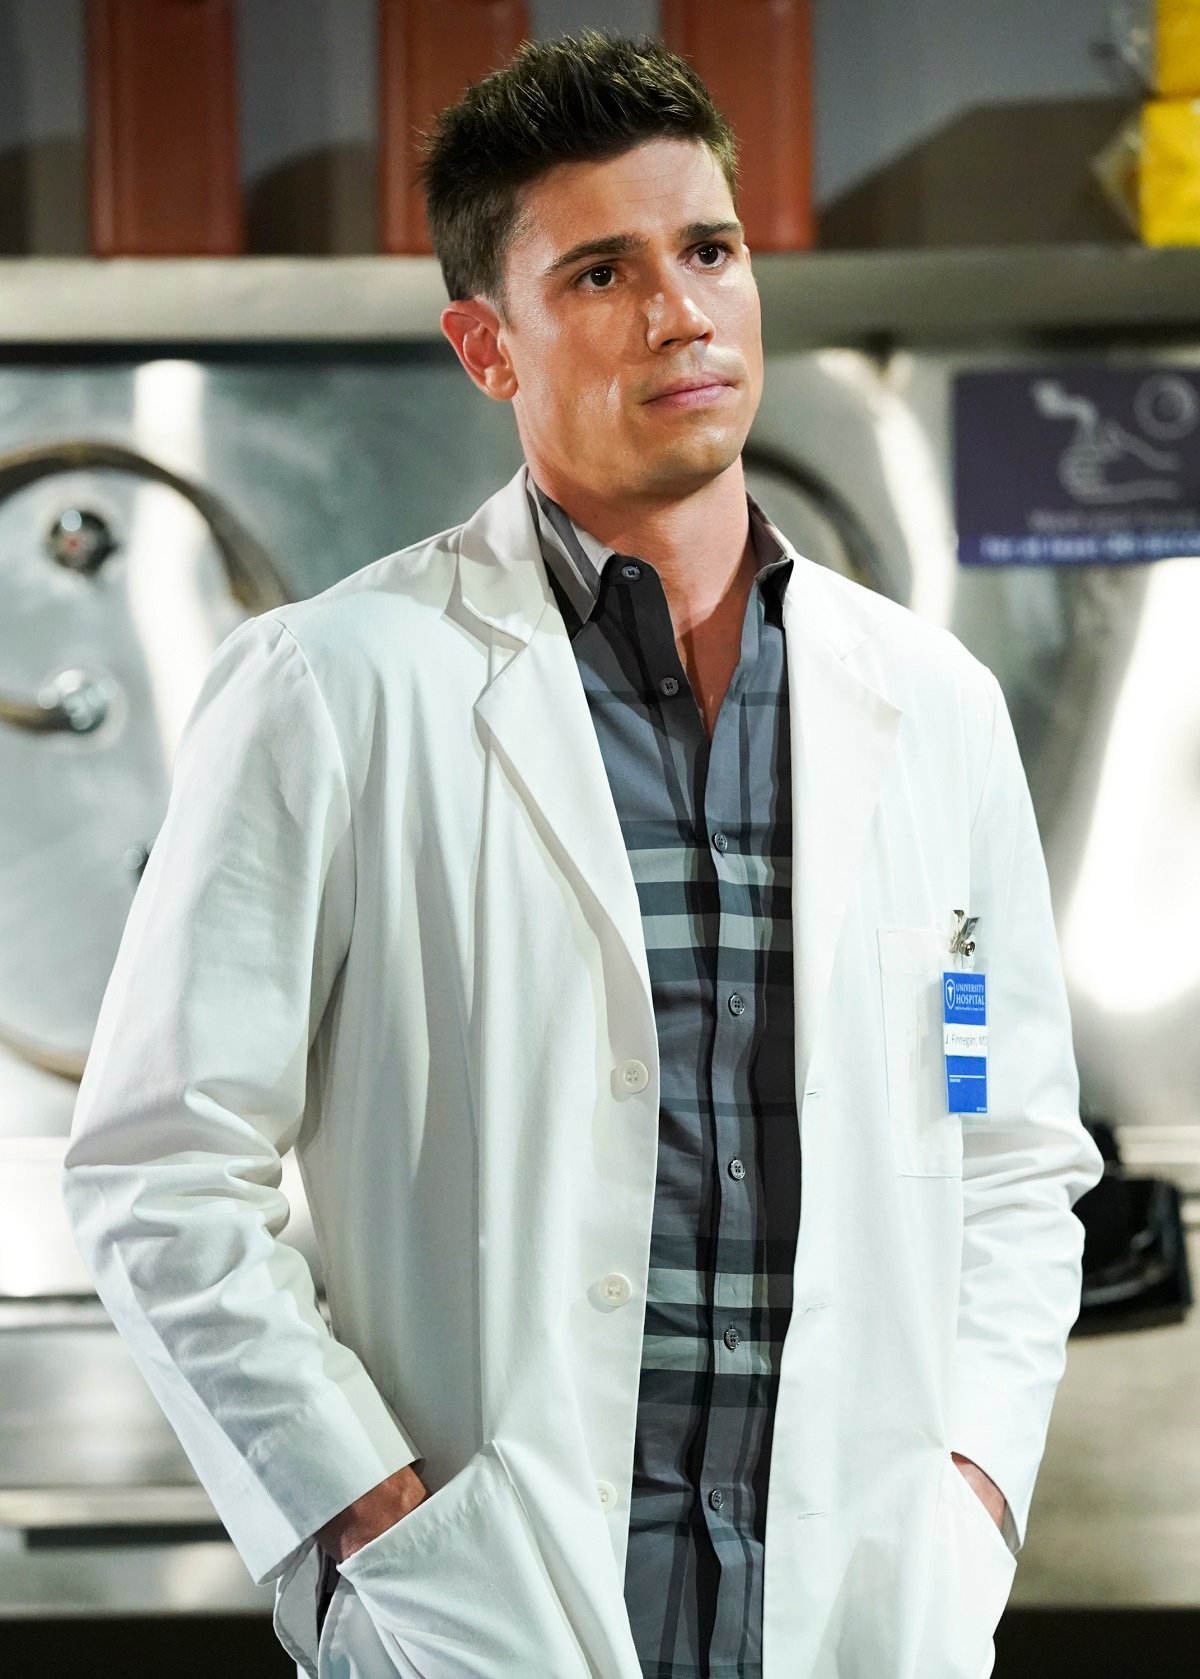 'The Bold and the Beautiful' actor Tanner Novlan wearing a plaid shirt and white lab coat in a scene from the soap opera.